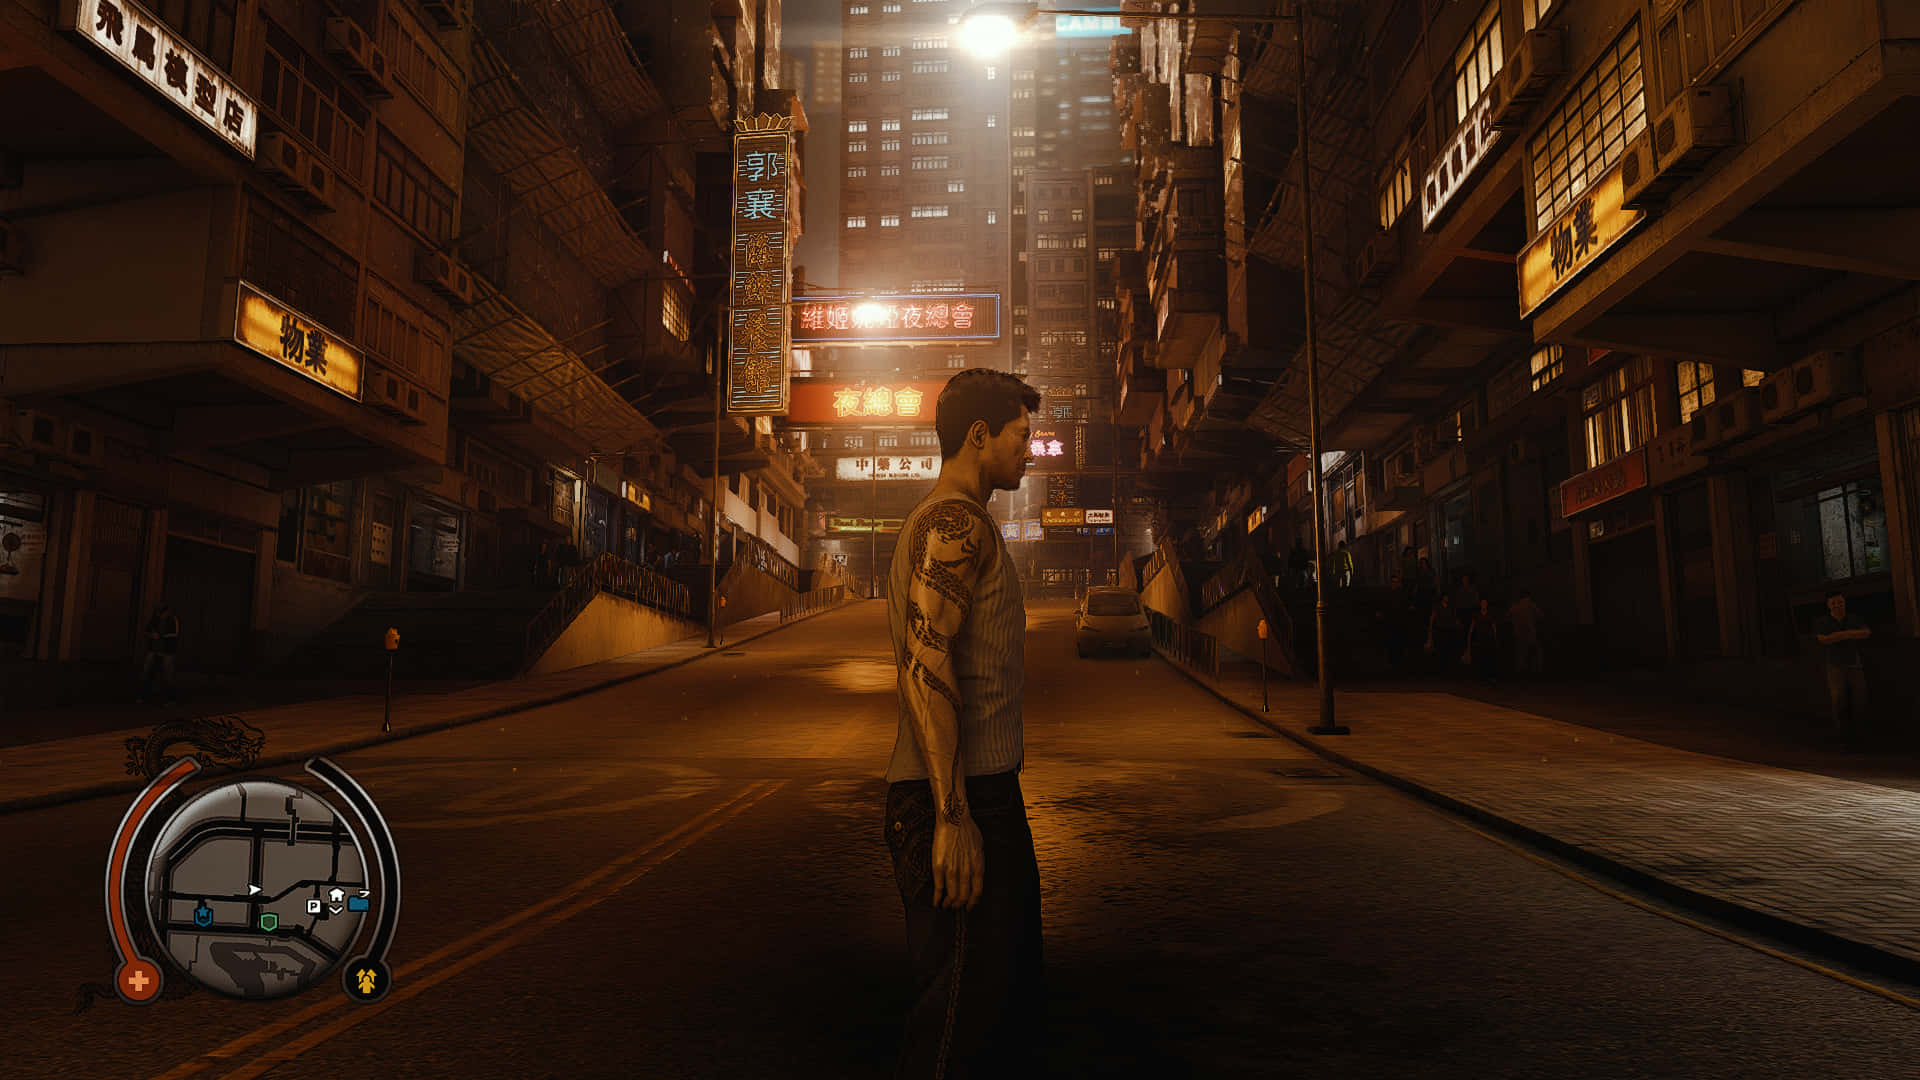 Get lost in the gritty Hong Kong backstreets with Sleeping Dogs